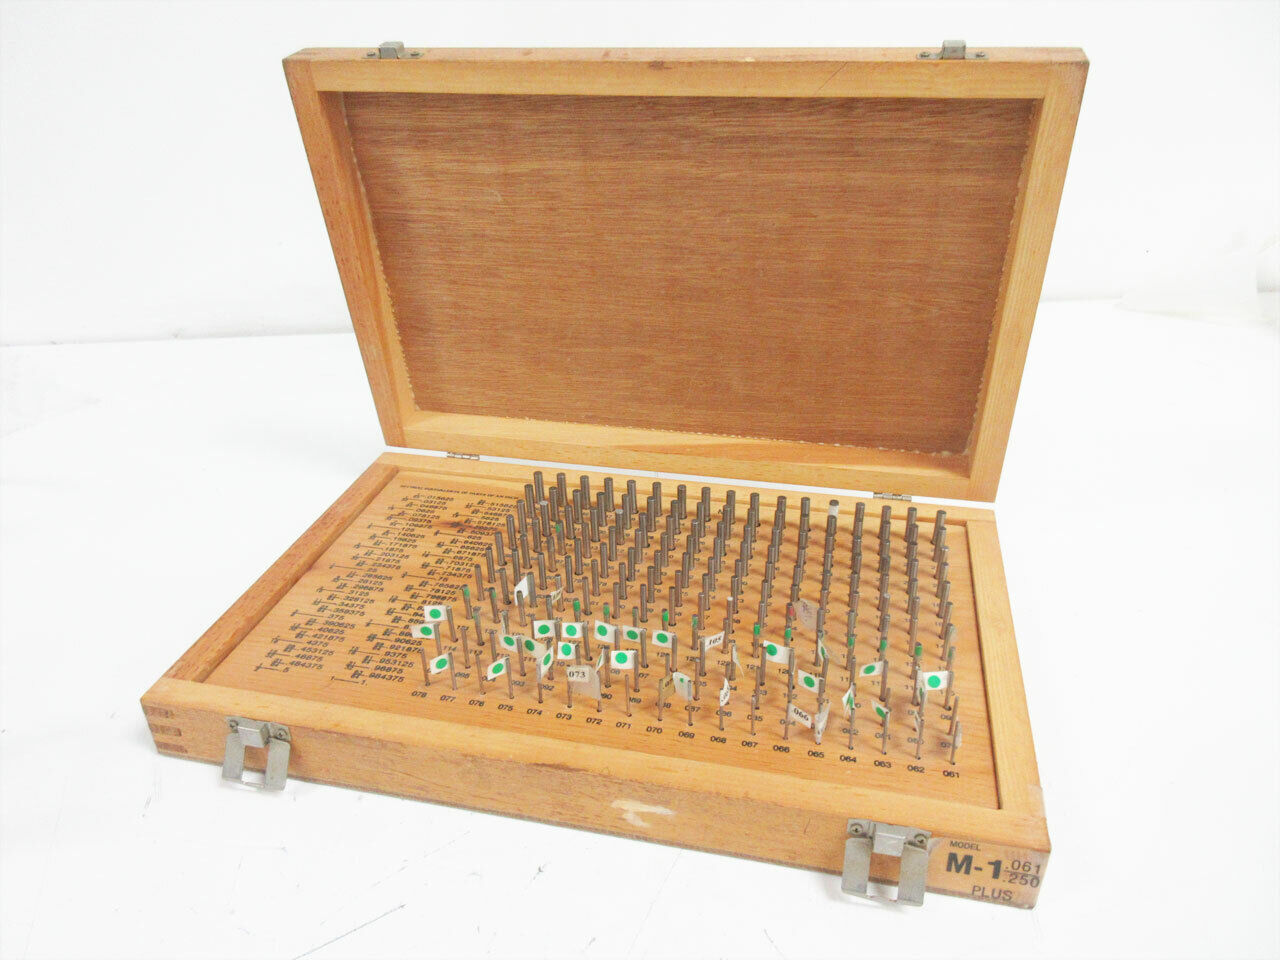 MEYER M-1 Max 75% OFF PLUS .061 - .250 SET BOX MACHINIST PIN GAGE WOODEN Omaha Mall